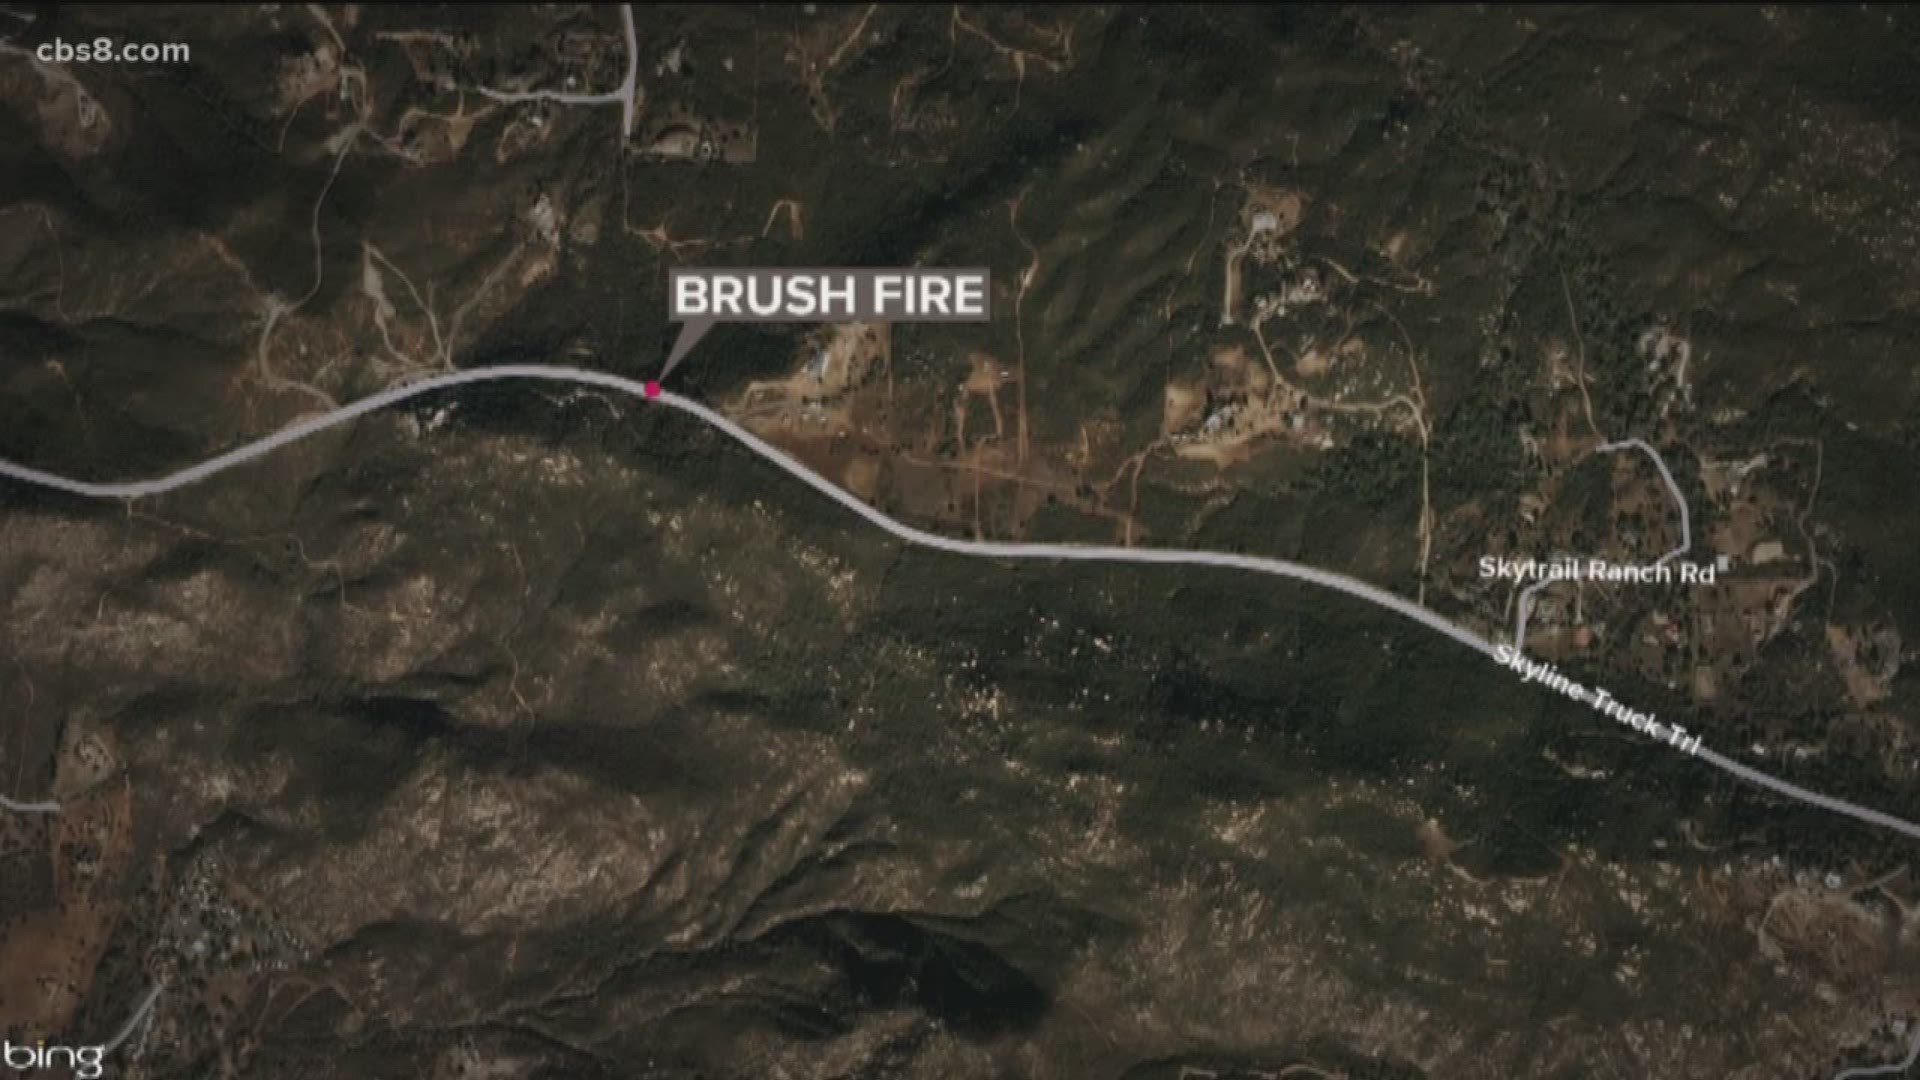 A three acre brush fire is burning in Lyons Valley in Jamul Wednesday night, according to Cal Fire San Diego.